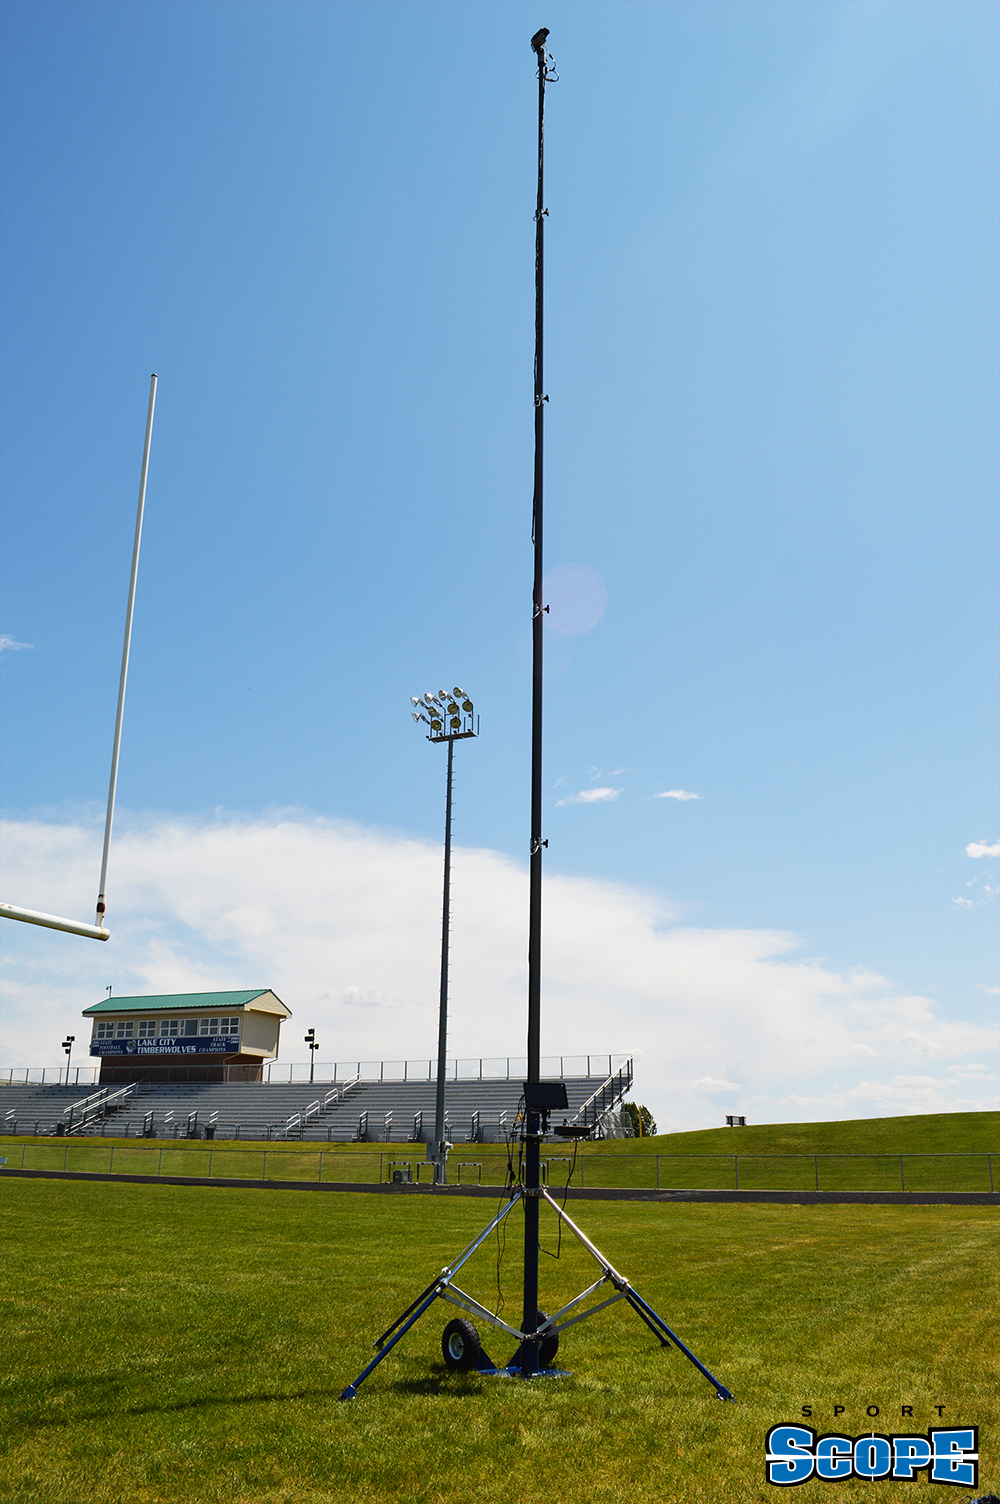 Premium Endzone Camera Systems at an Affordable Price - Sport Scope Video